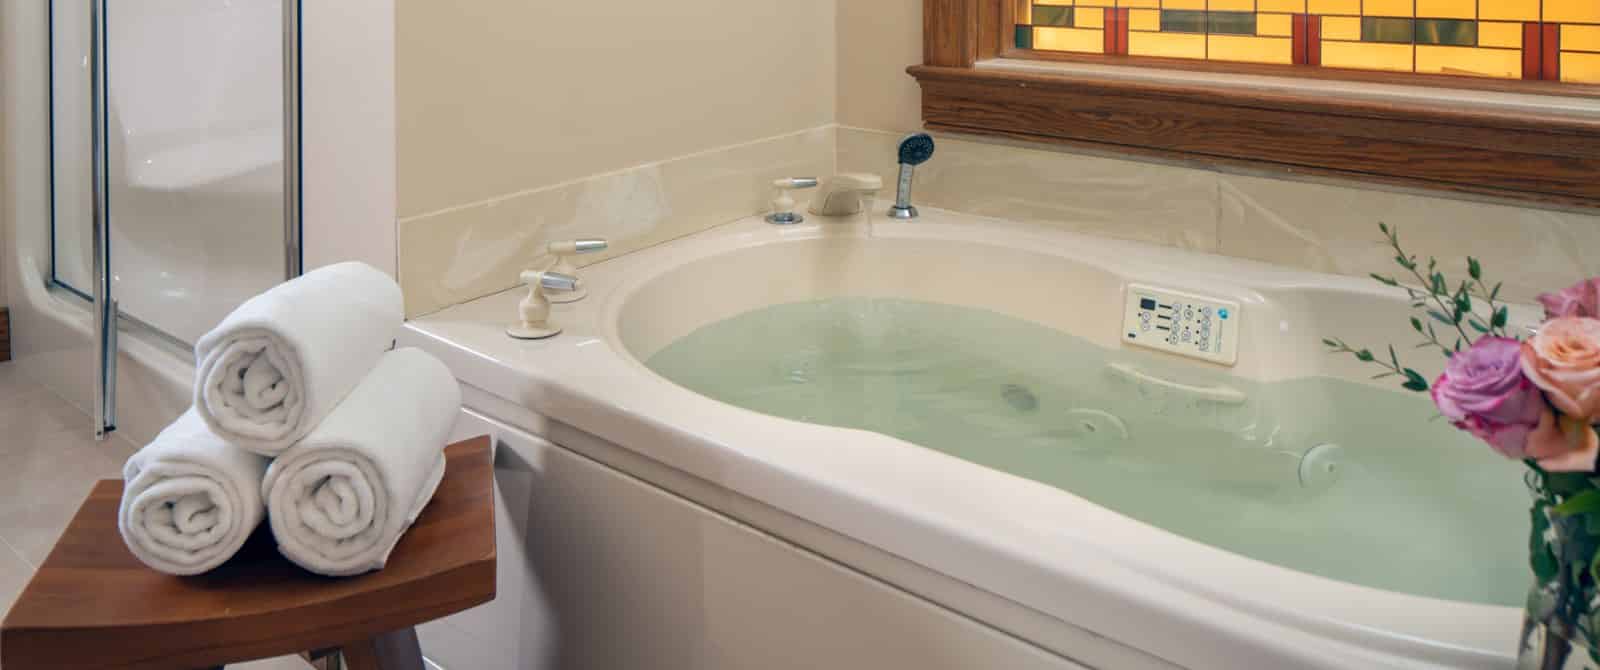 Close up view of large jetted tub filling with water and a small wooden stool with three white rolled towels